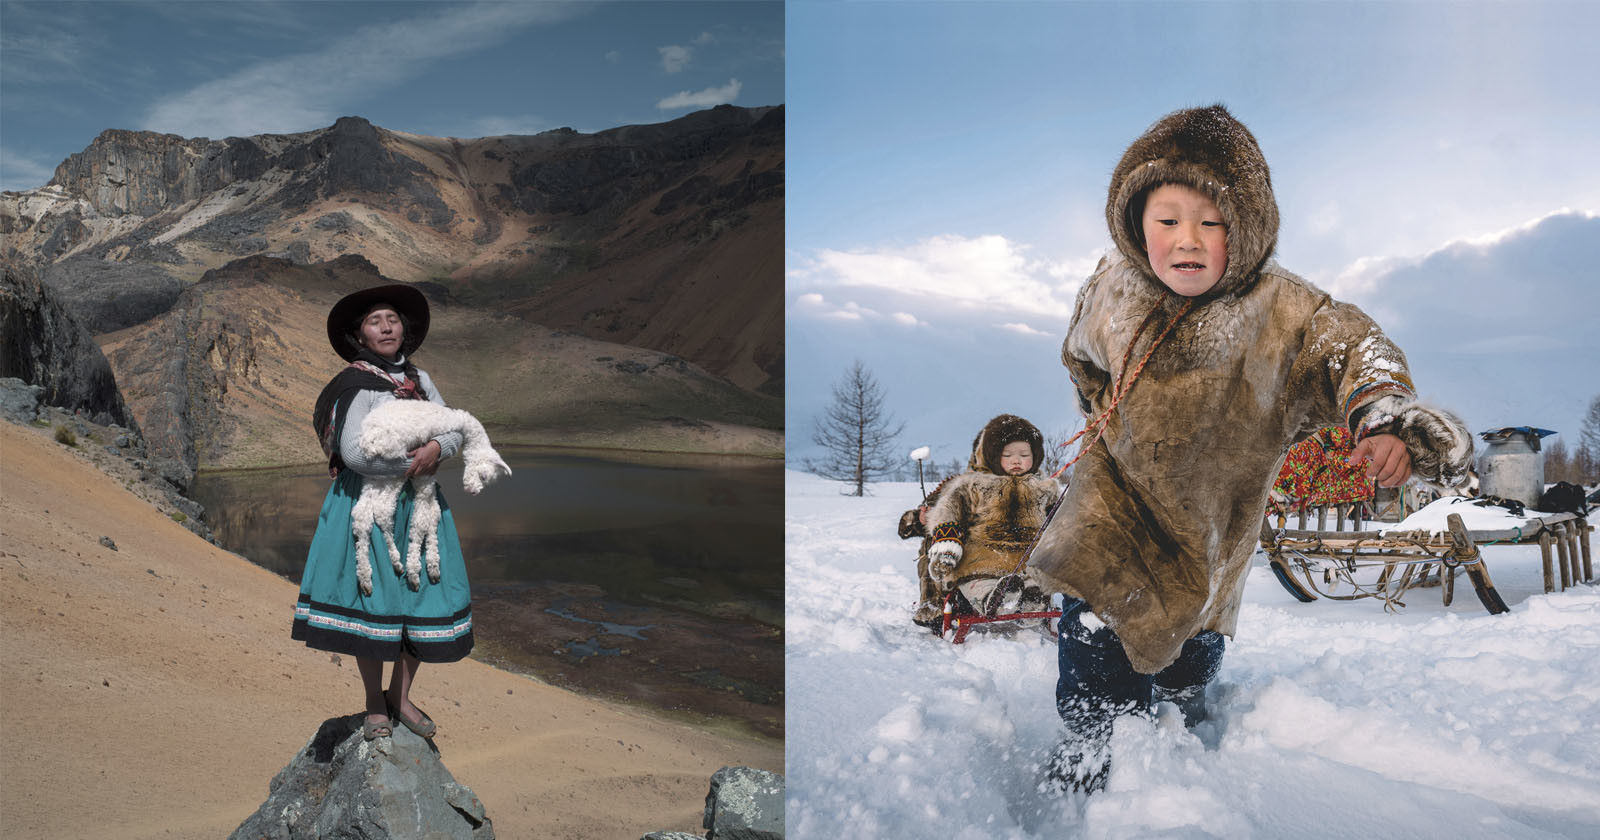 Portraits of Indigenous People From Around the Globe Details Their Plight